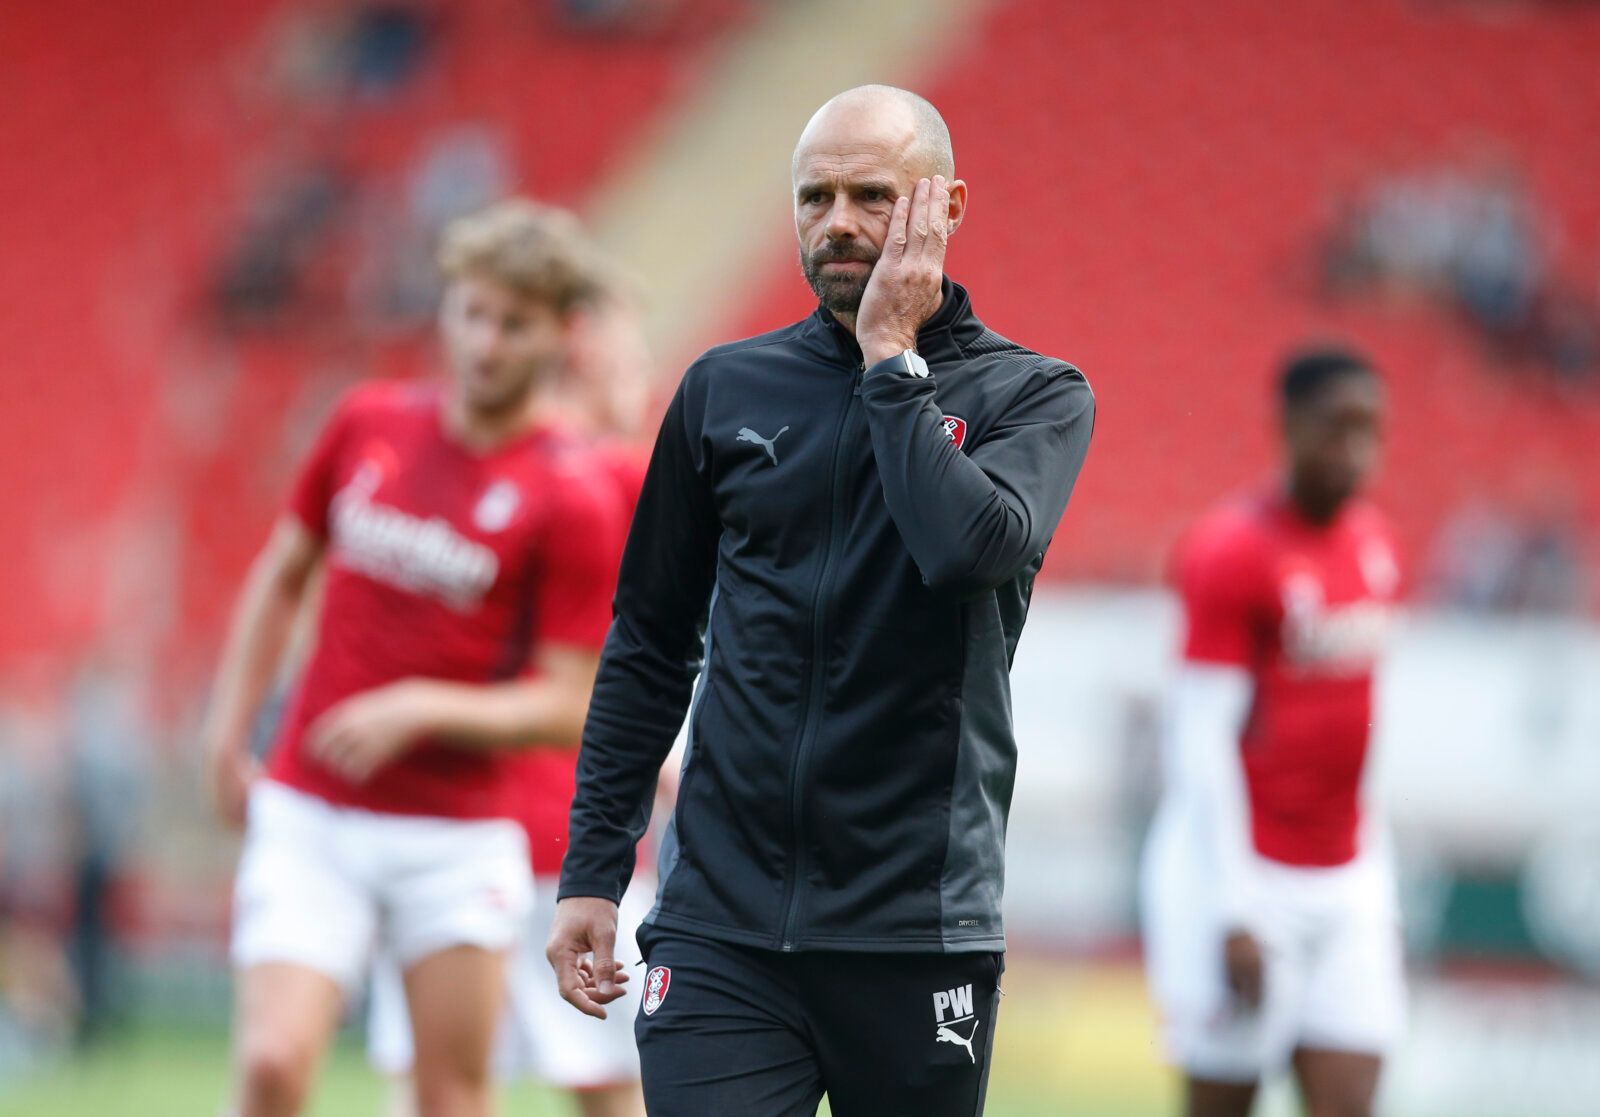 Soccer Football - Pre Season Friendly - Rotherham United v Newcastle United - AESSEAL New York Stadium, Rotherham, Britain - July 27, 2021 Rotherham United manager Paul Warne before the match Action Images via Reuters/Ed Sykes